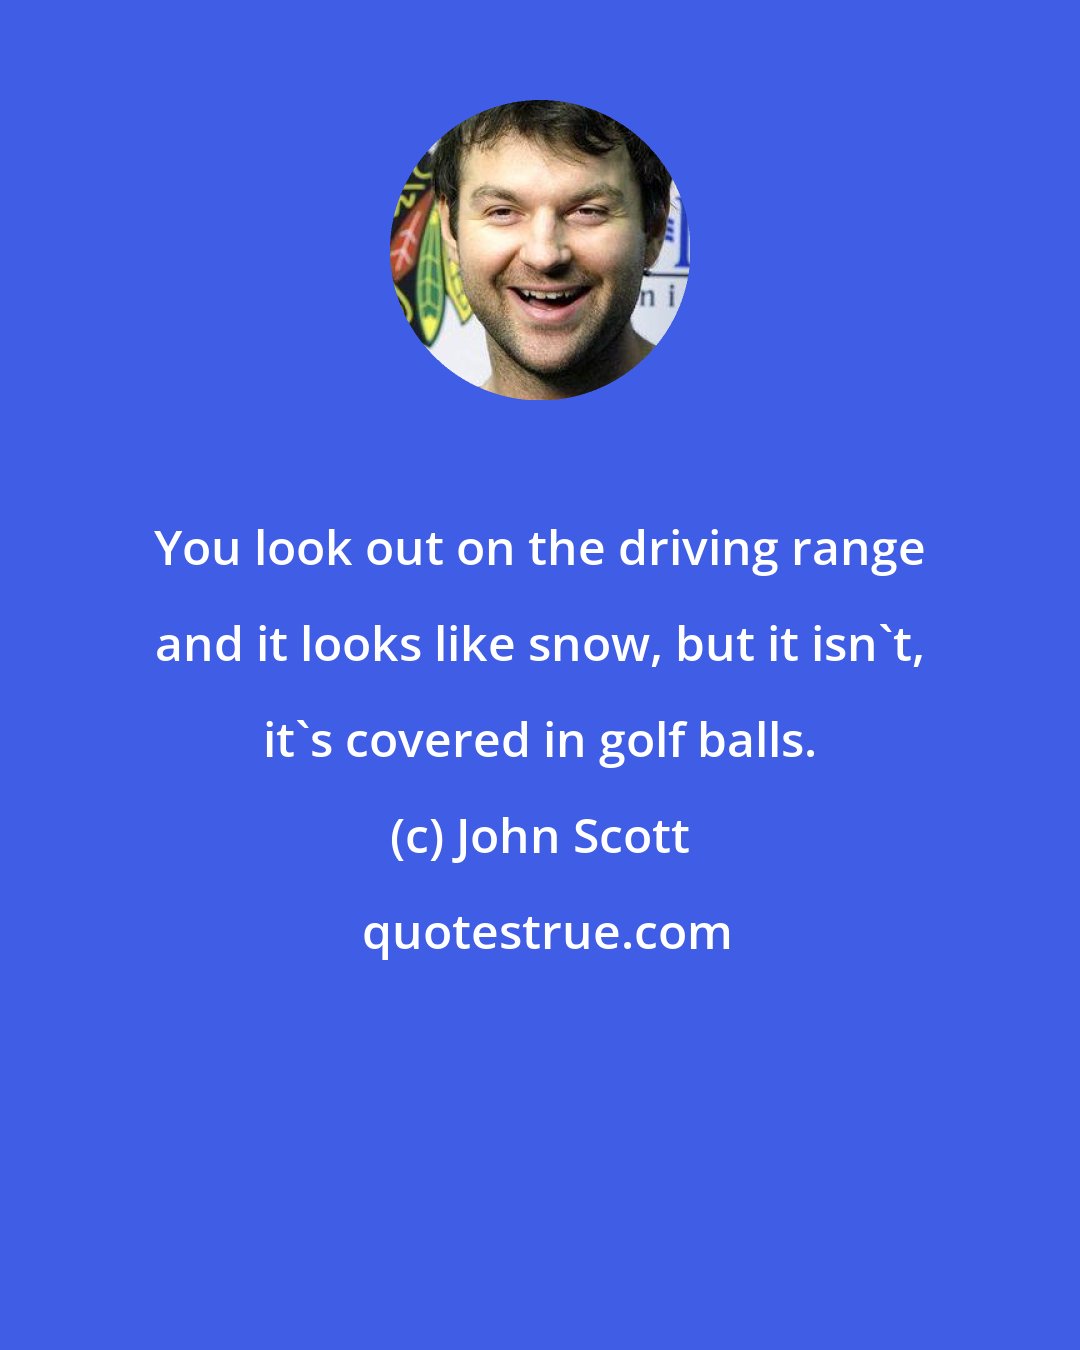 John Scott: You look out on the driving range and it looks like snow, but it isn't, it's covered in golf balls.